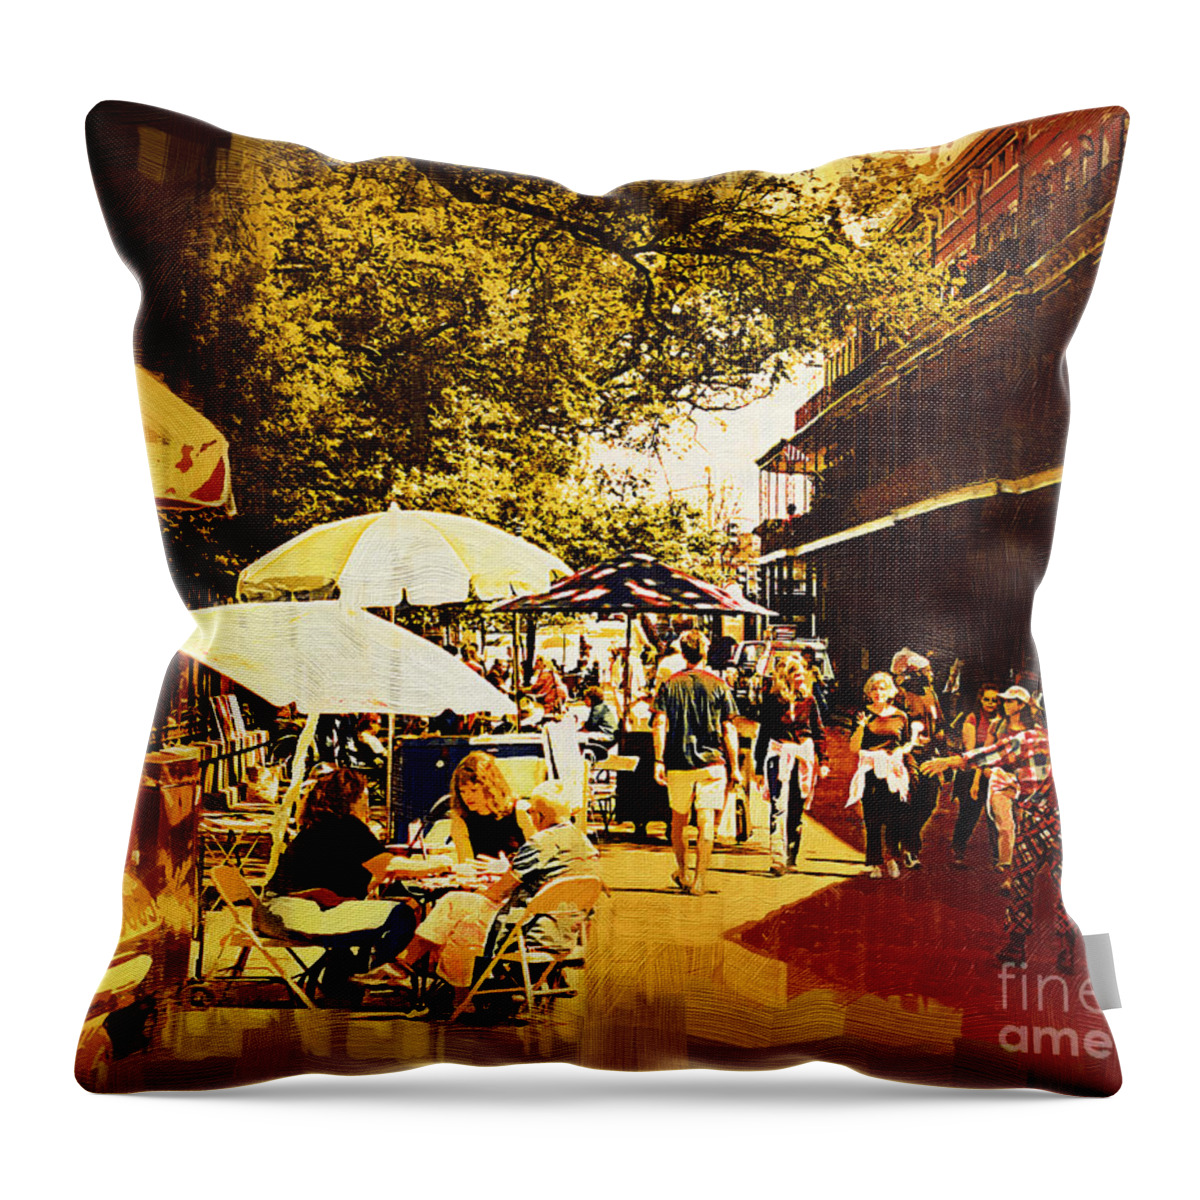 New-orleans Throw Pillow featuring the digital art Gothic New Orleans by Kirt Tisdale